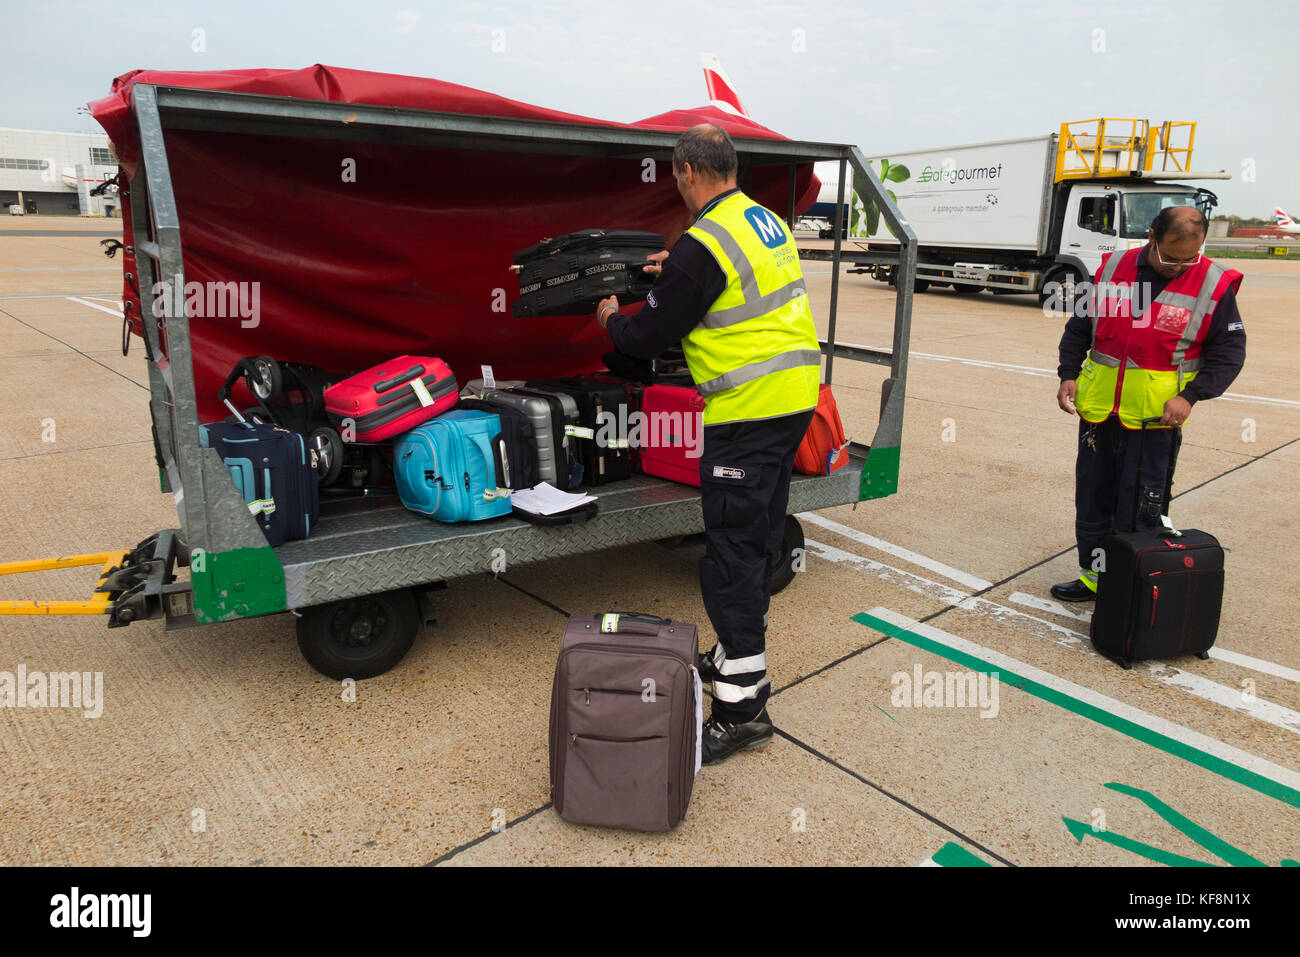 Baggage handlers trolley / truck carrier / vehicle / aircraft loader / container / ground support staff / carrying & loading passenger hold luggage. Stock Photo